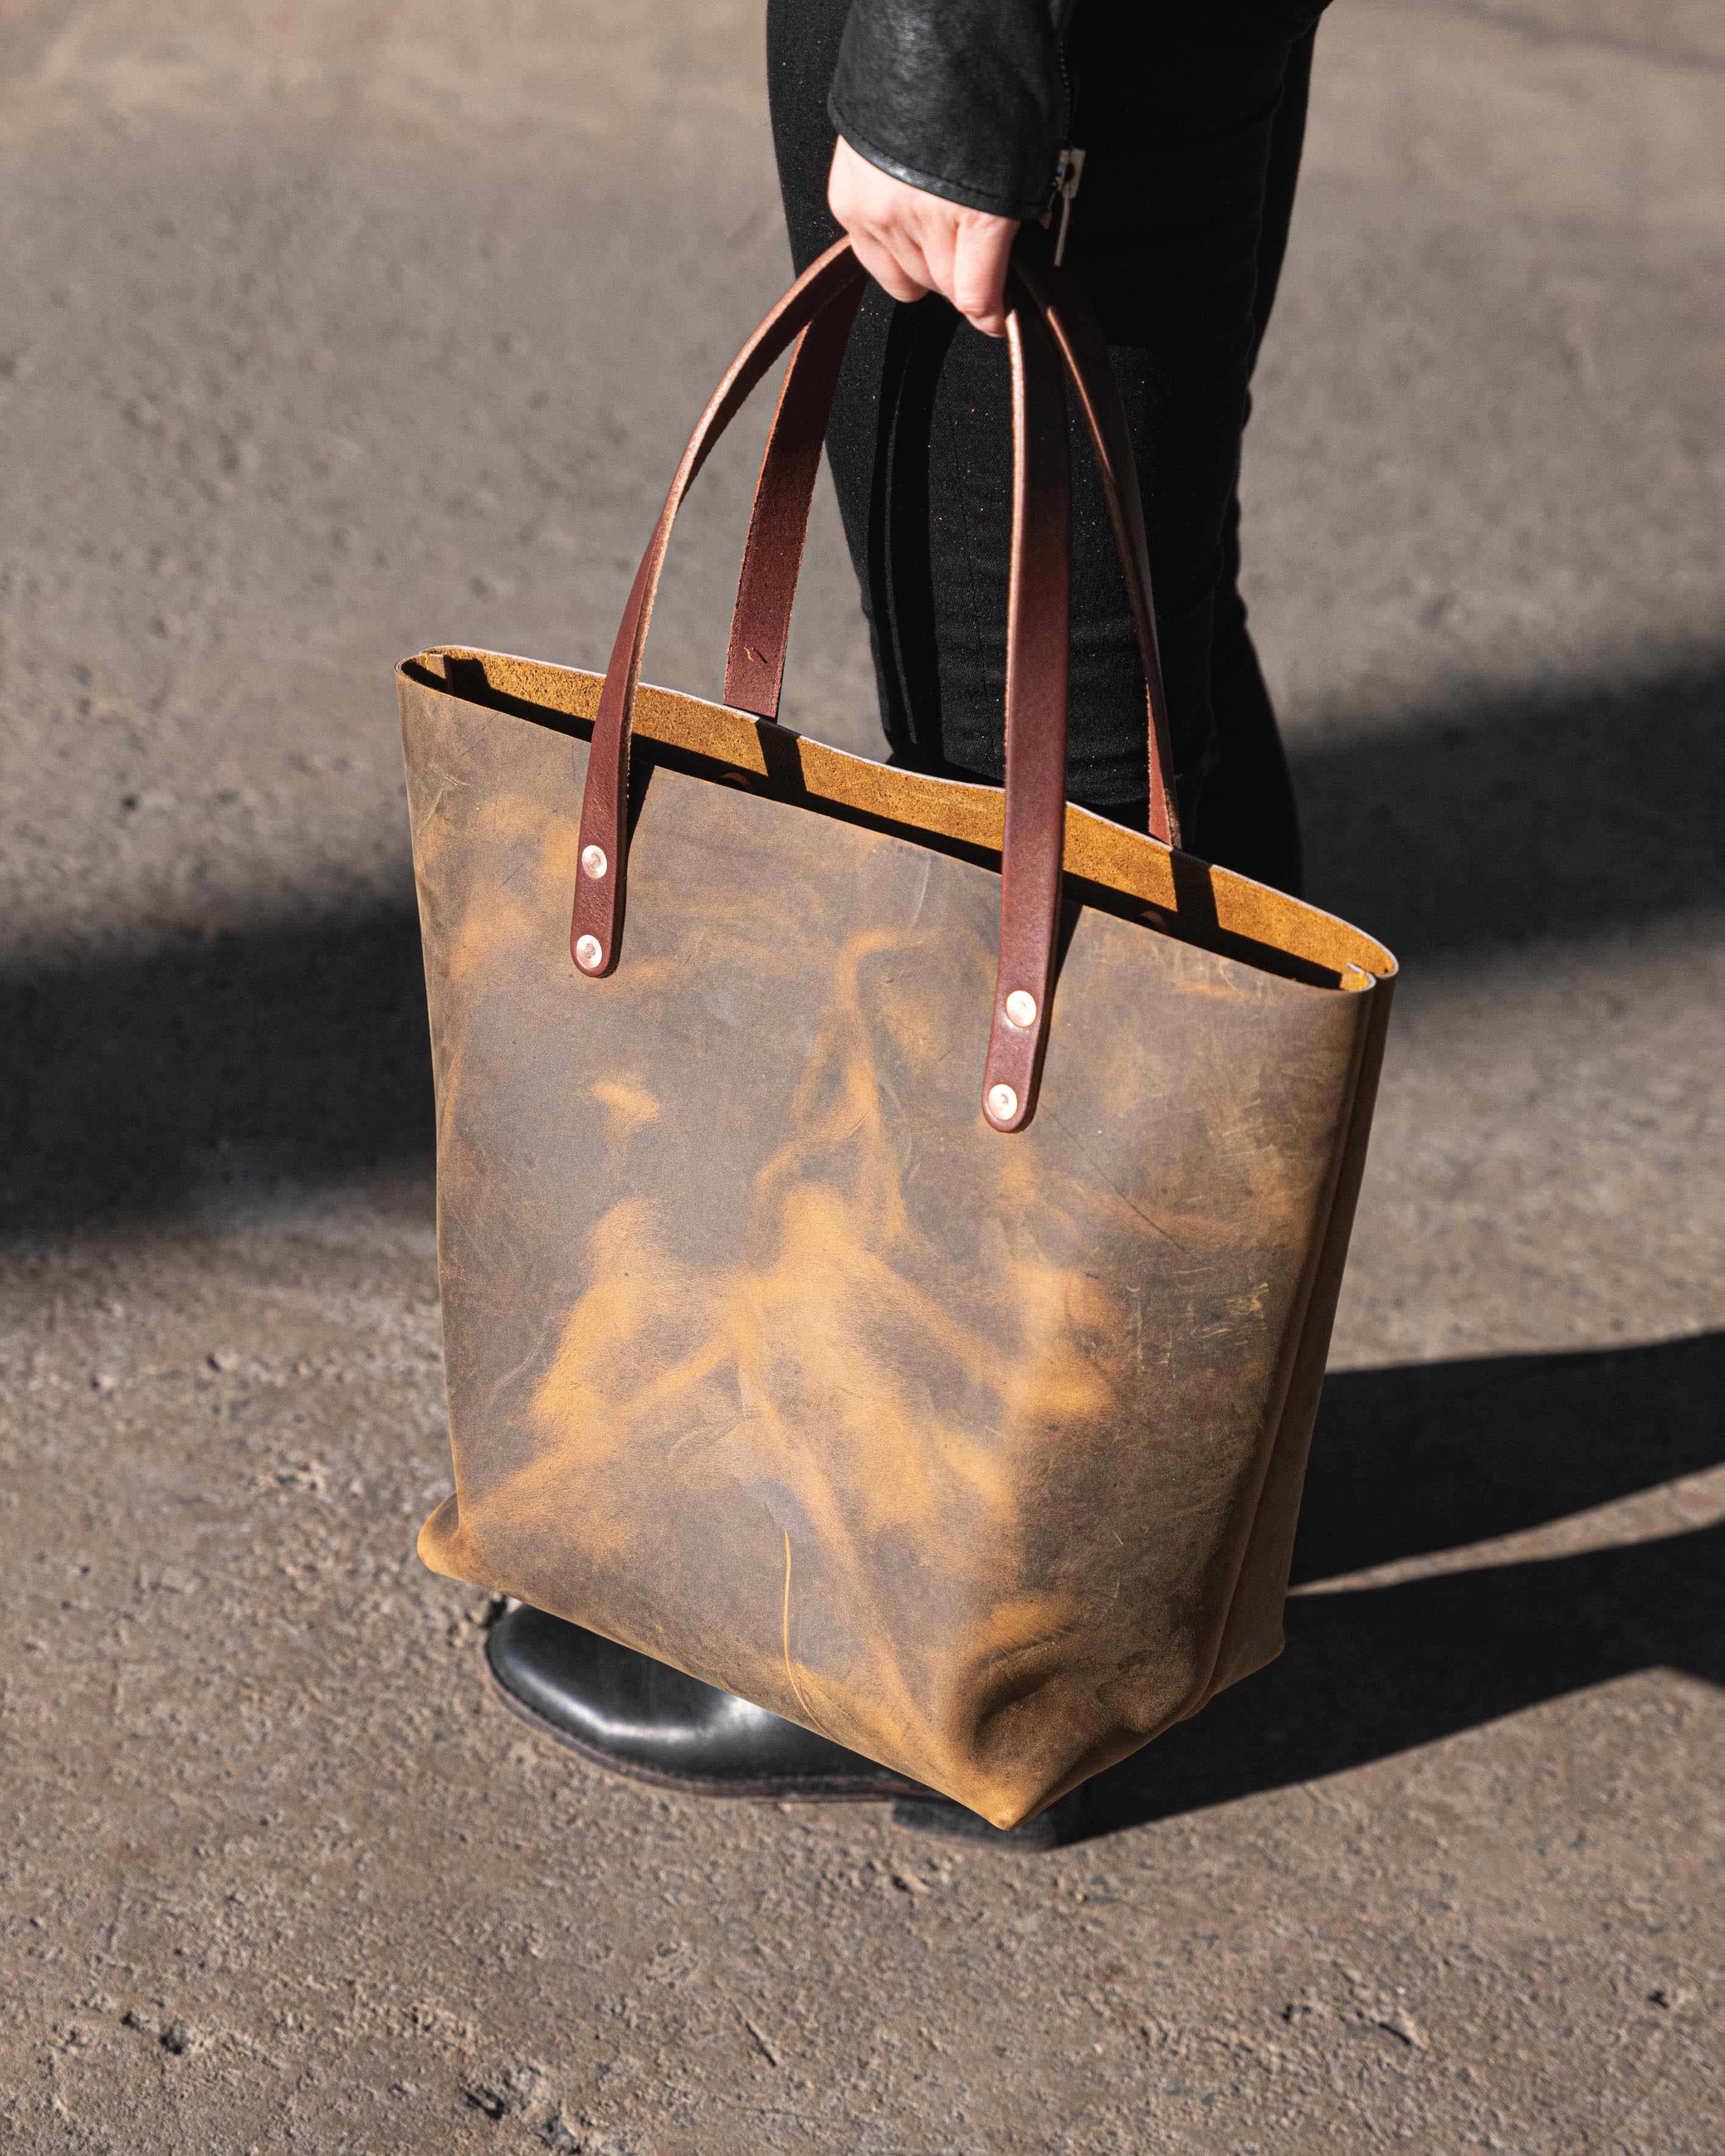 Leather Tote Bag - Crazy Horse Tan